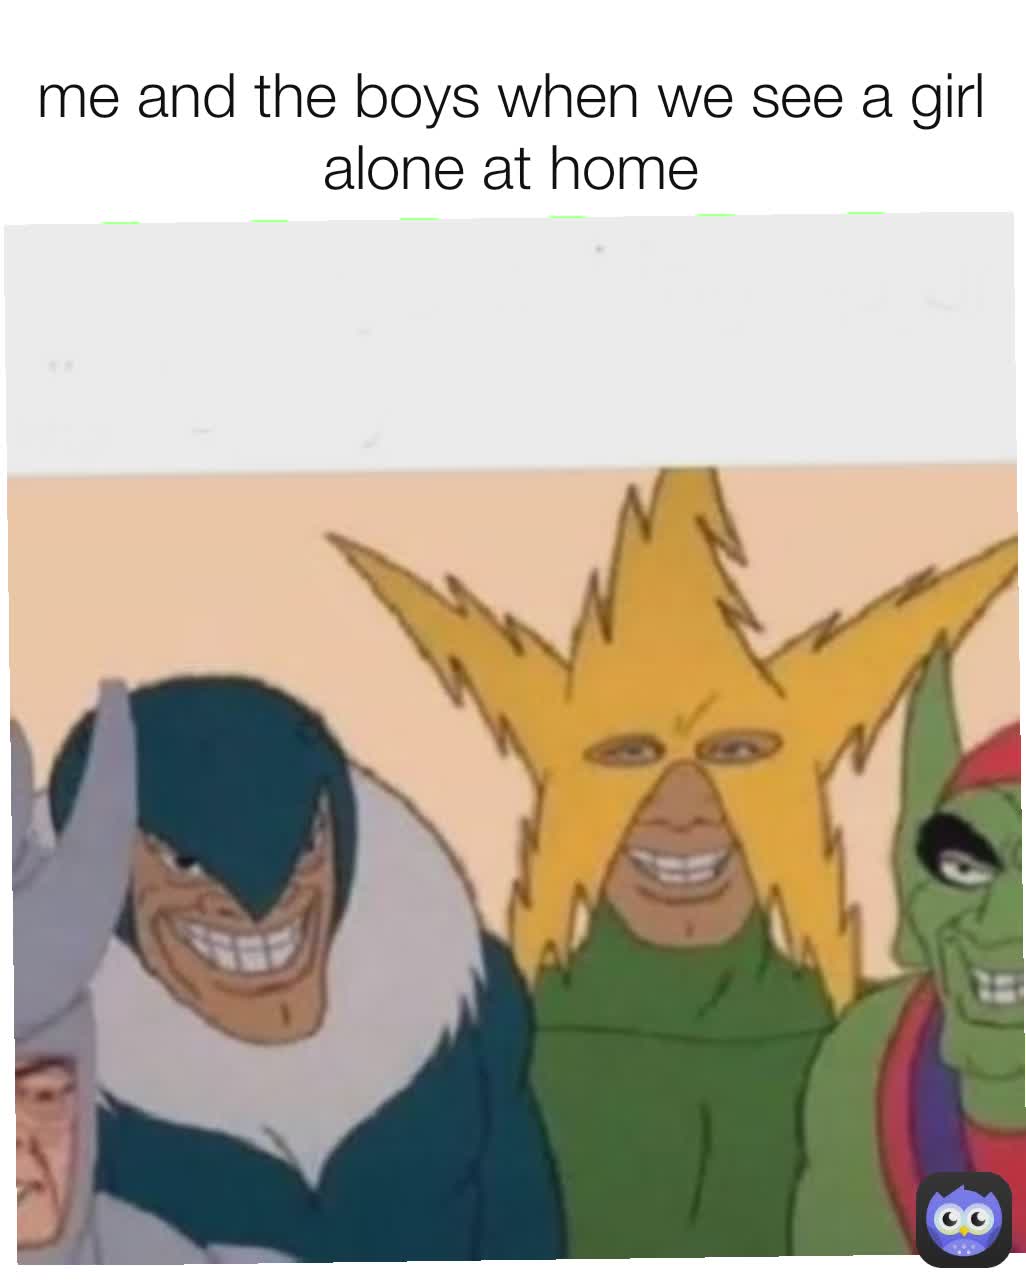 me and the boys when we see a girl alone at home